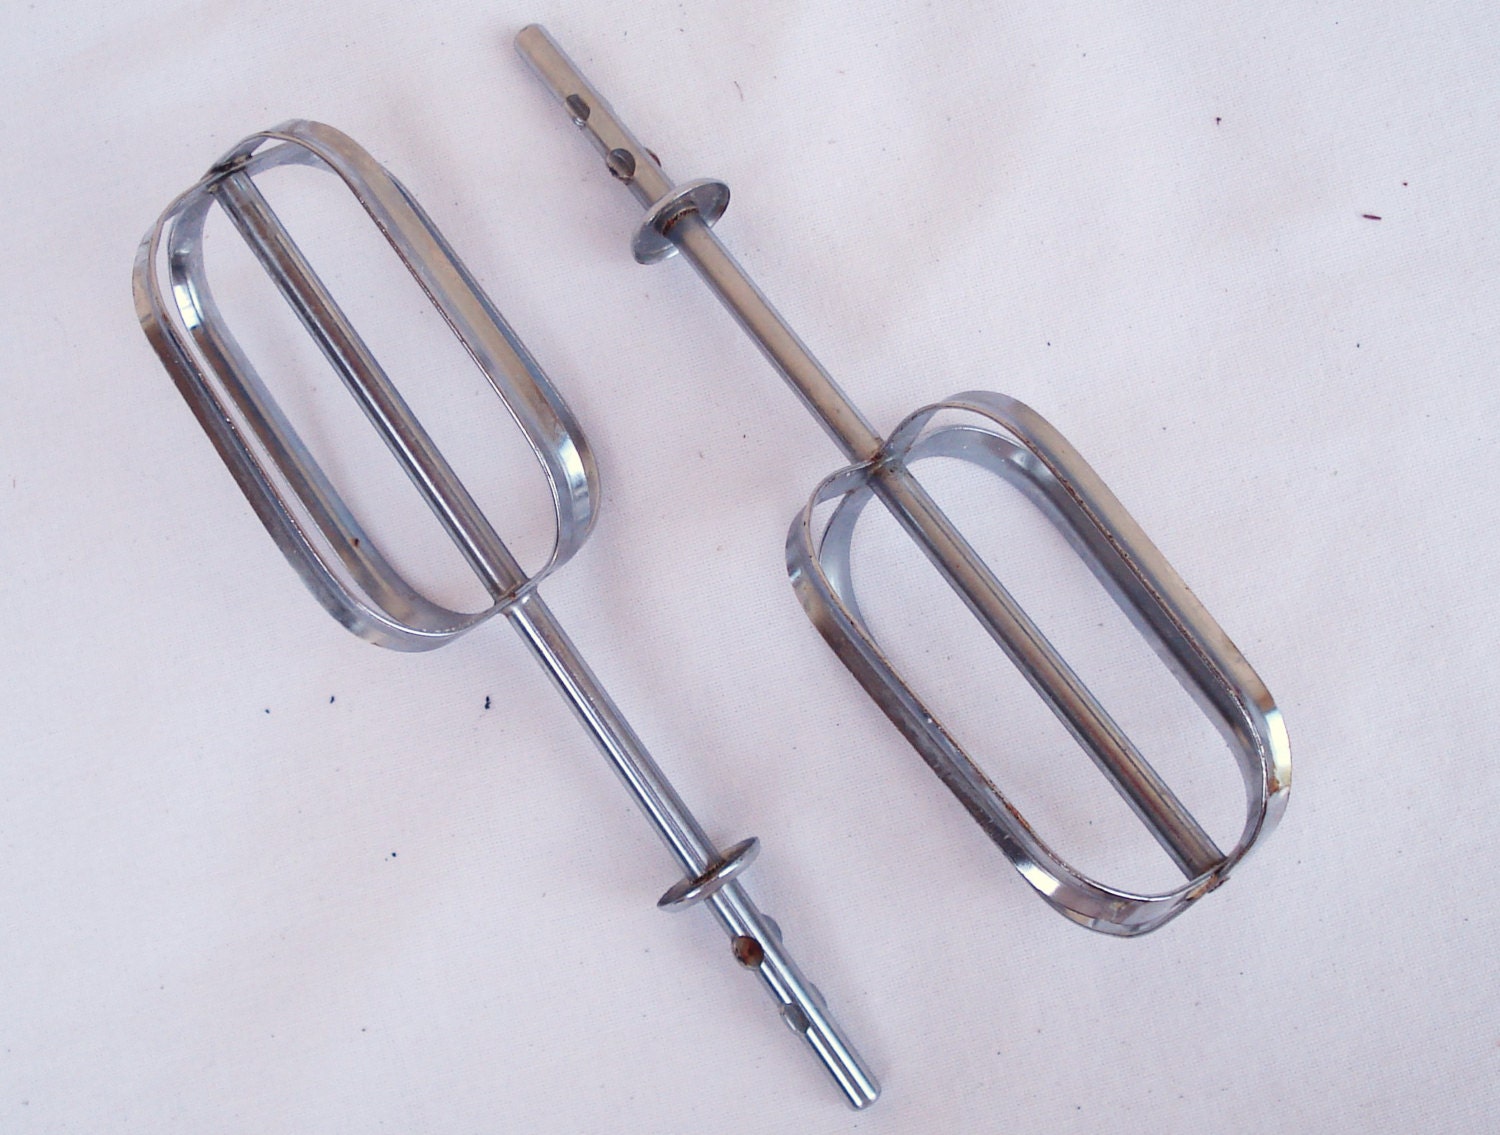 RIVAL Electric Hand Mixer Beater Blades Replacement Part. 